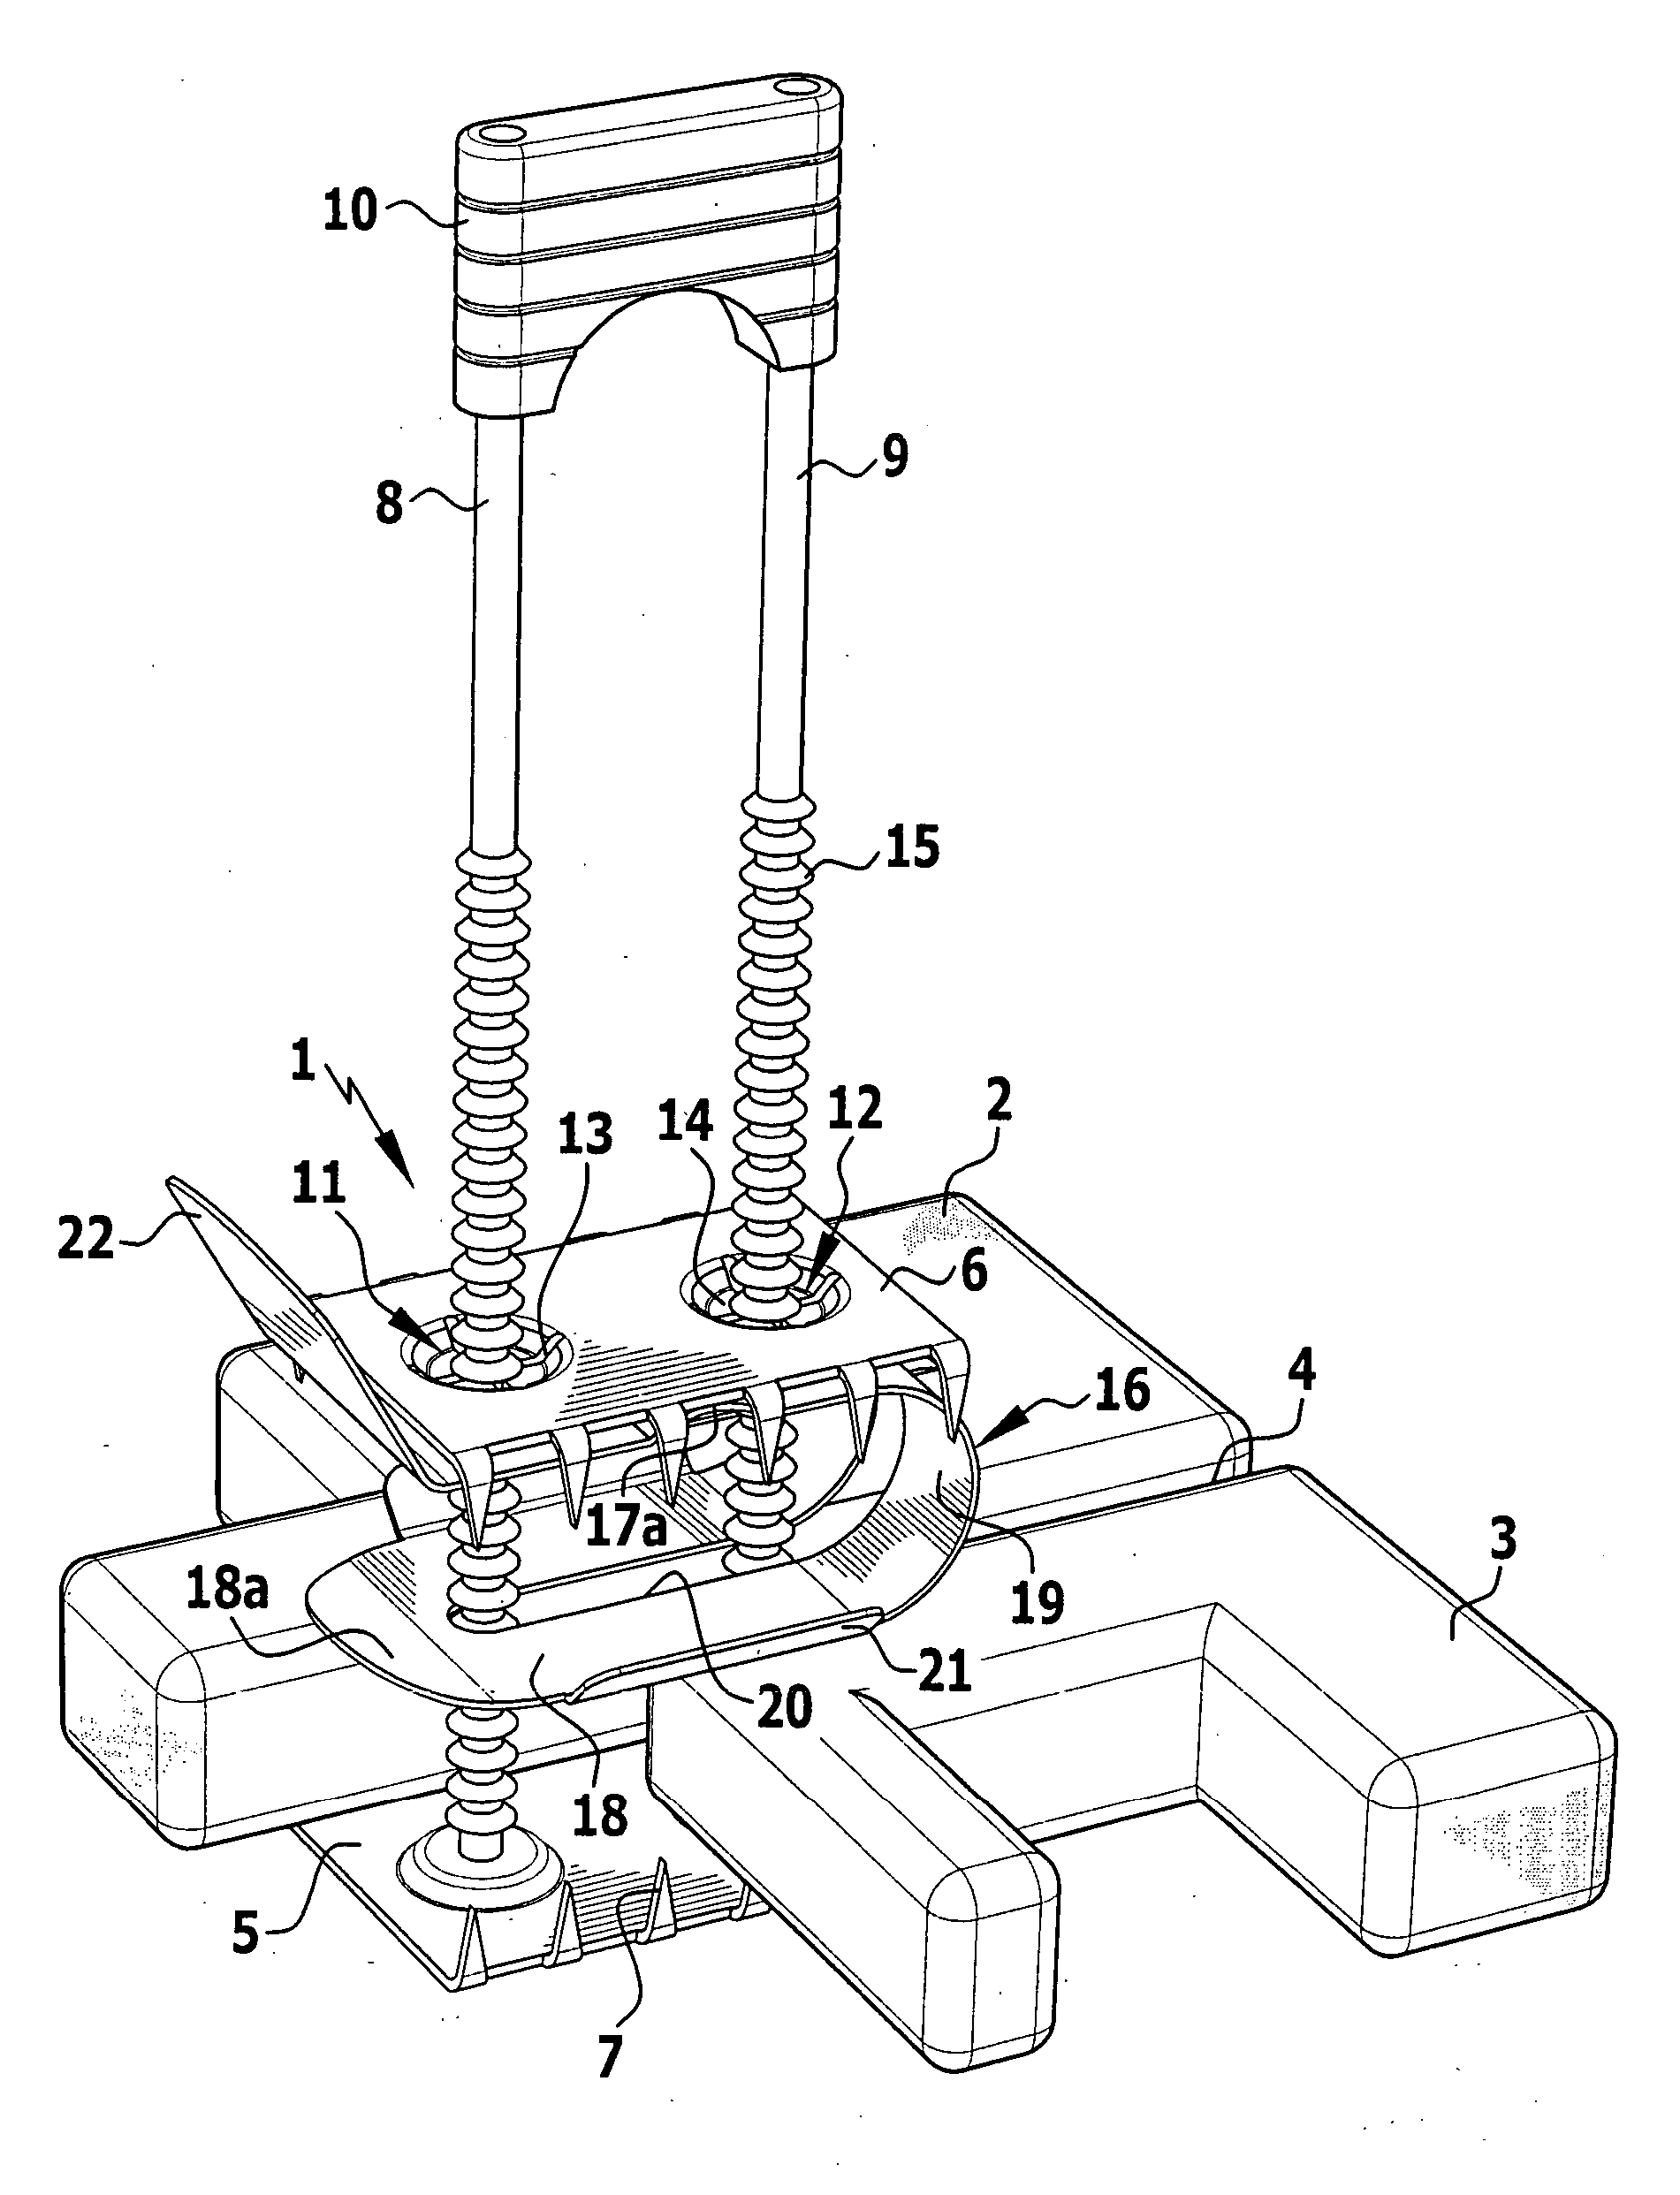 Surgical fixing device for two bone parts